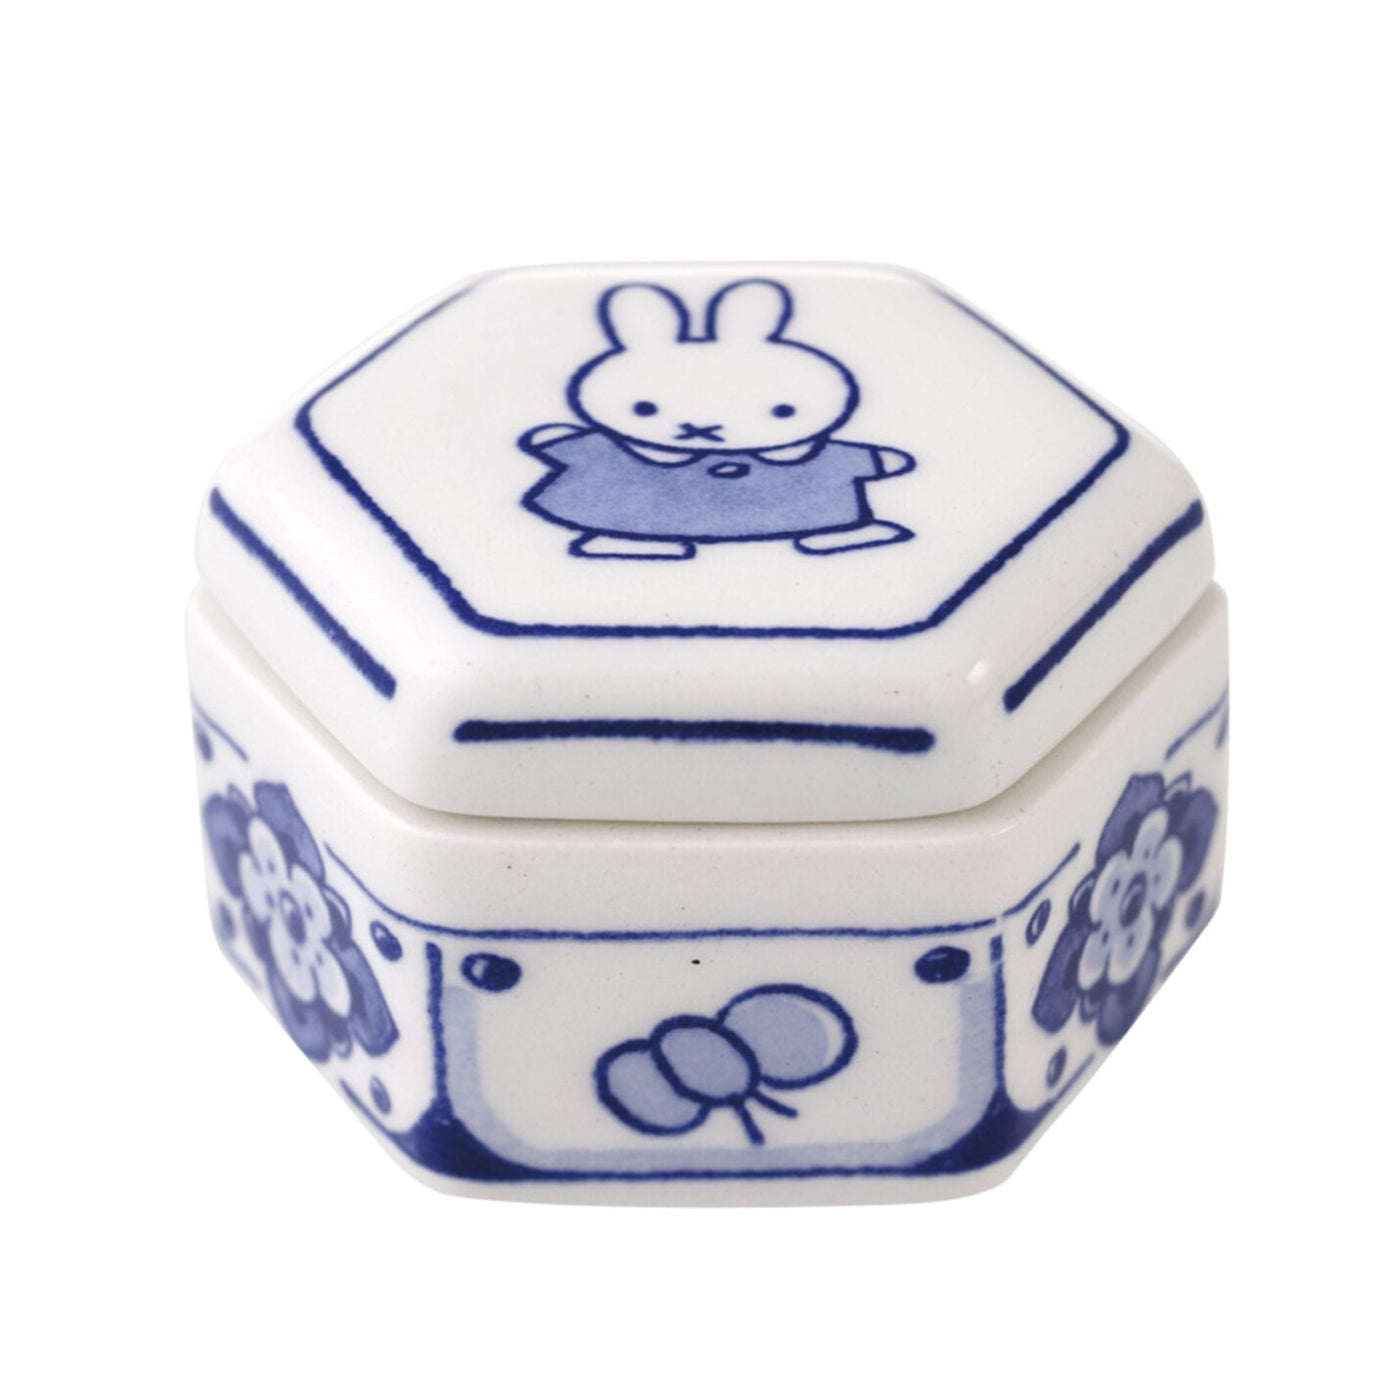 Miffy Tooth Box Delft Blue by Royal Delft